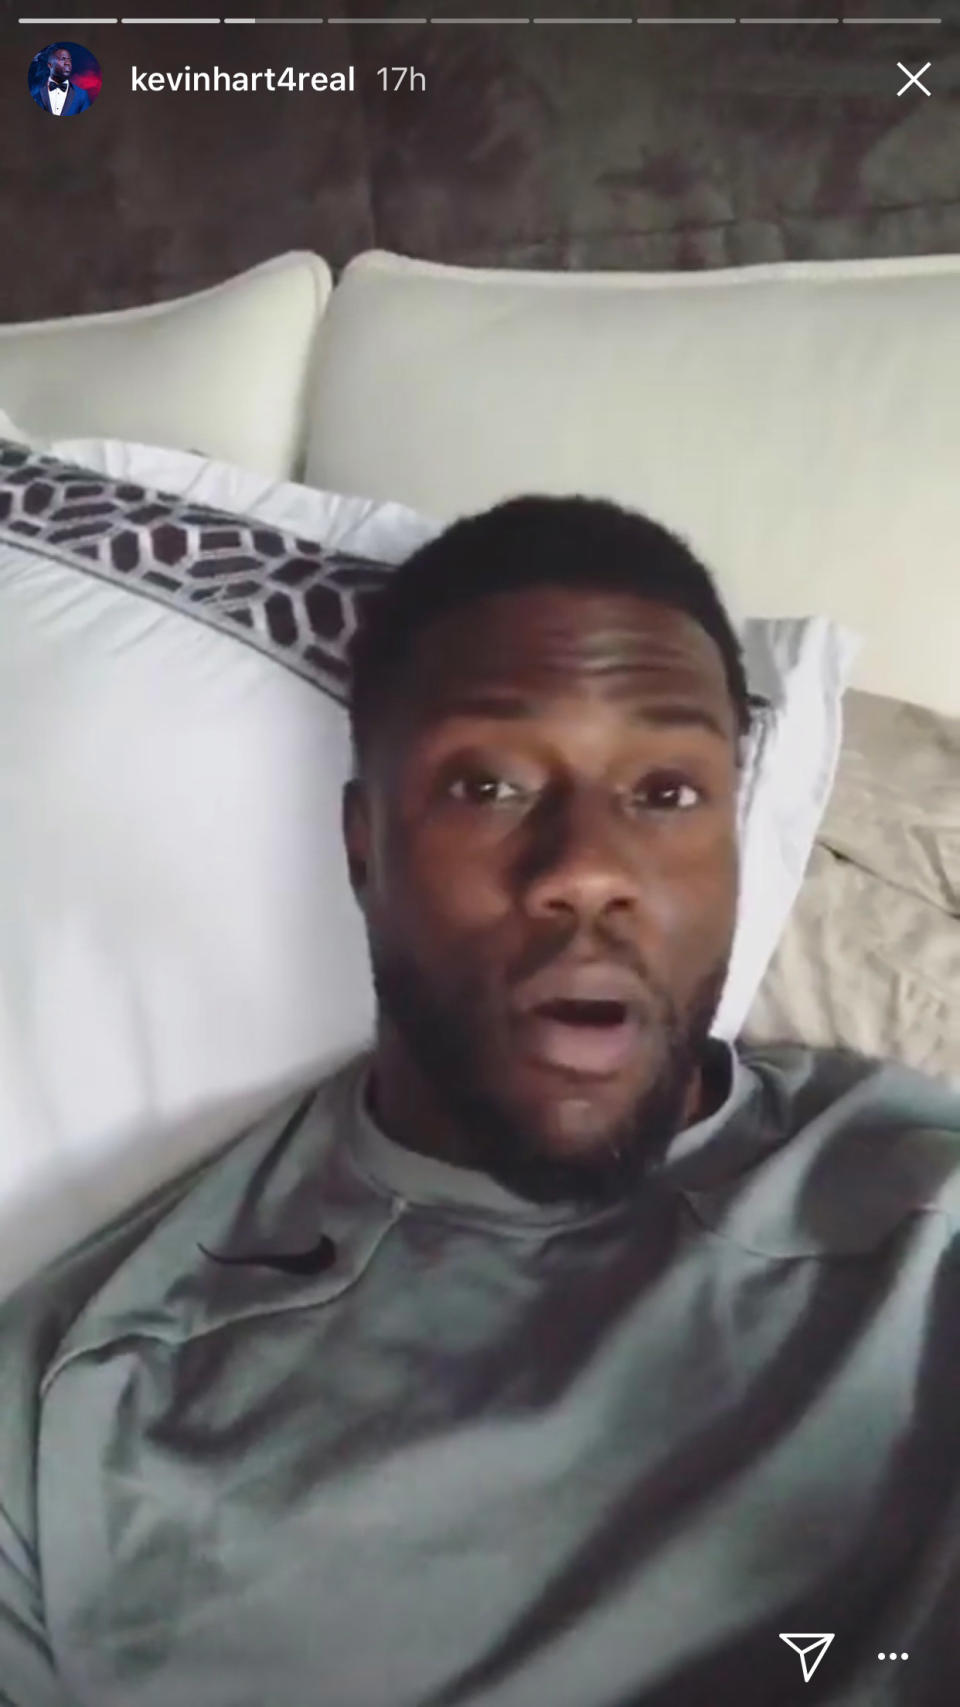 Kevin Hart Struggles When Wife Leaves Him Home with Kids and Dogs